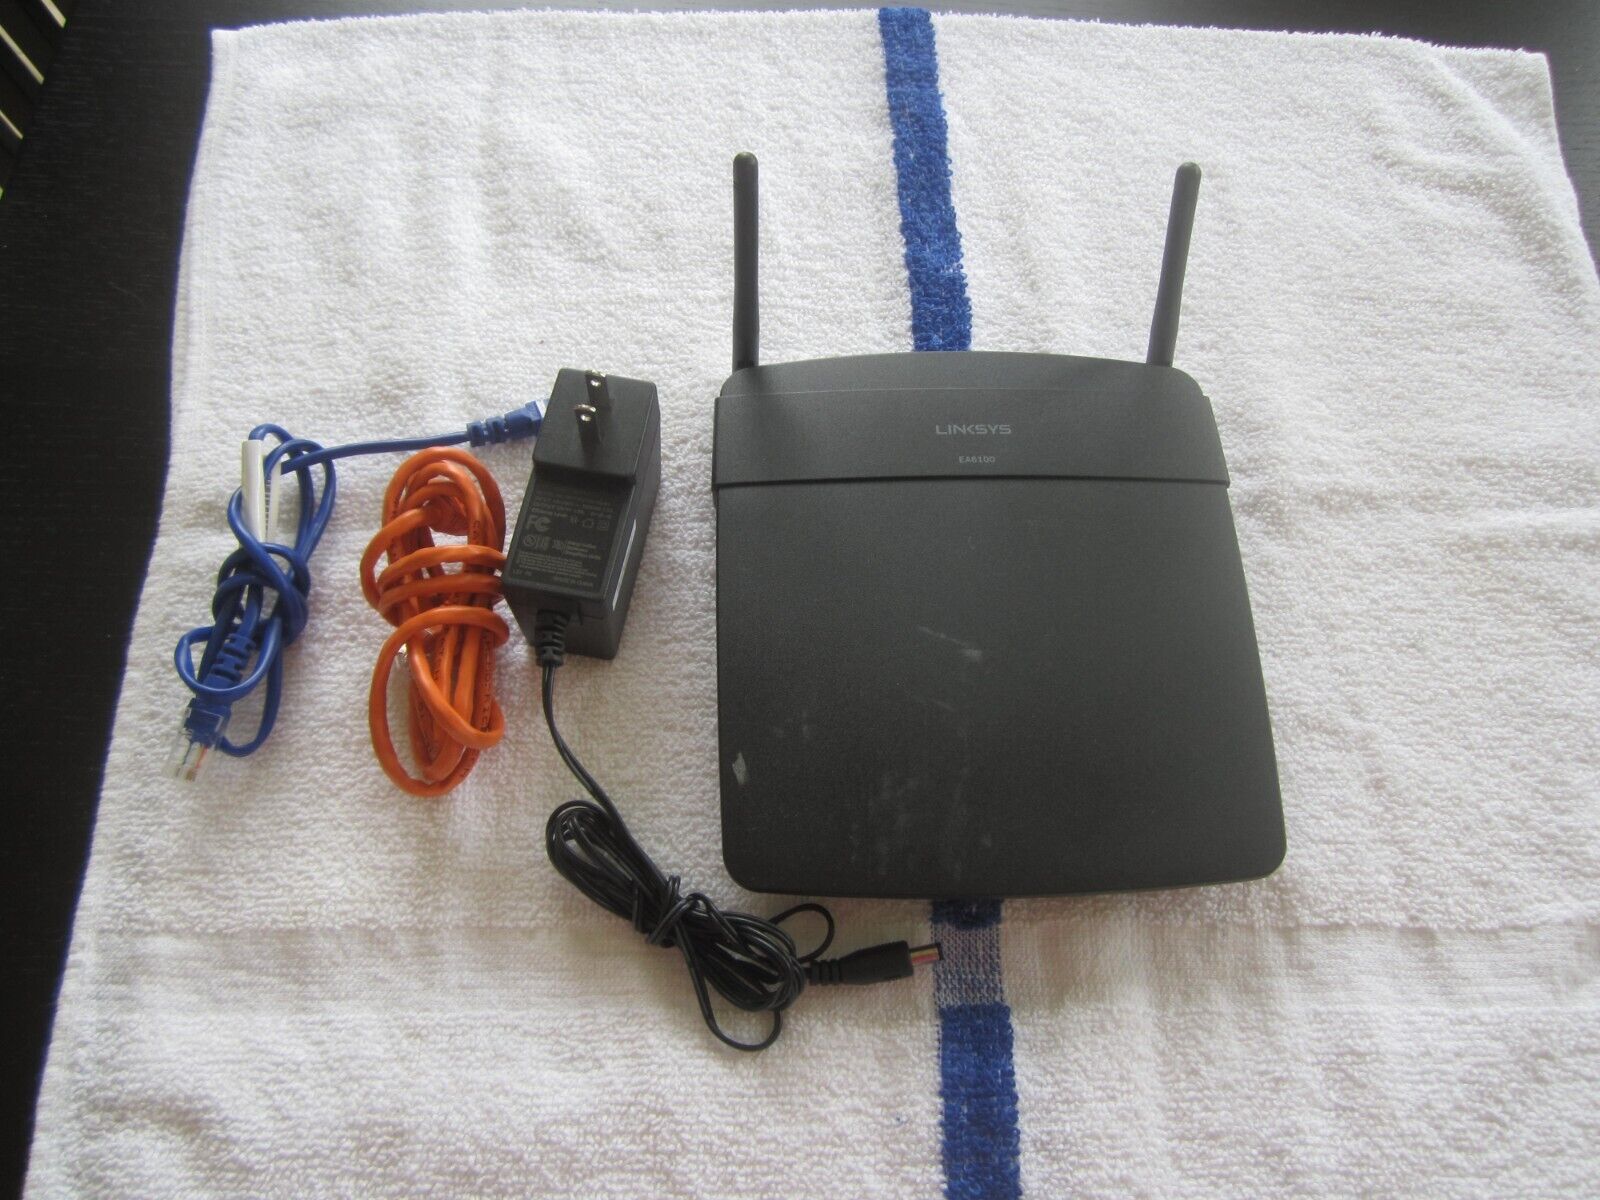 LINKSYS EA6100 AC1200 DualBand WIRELESS Router w/PwrCord & TWO CABLES - WORKS